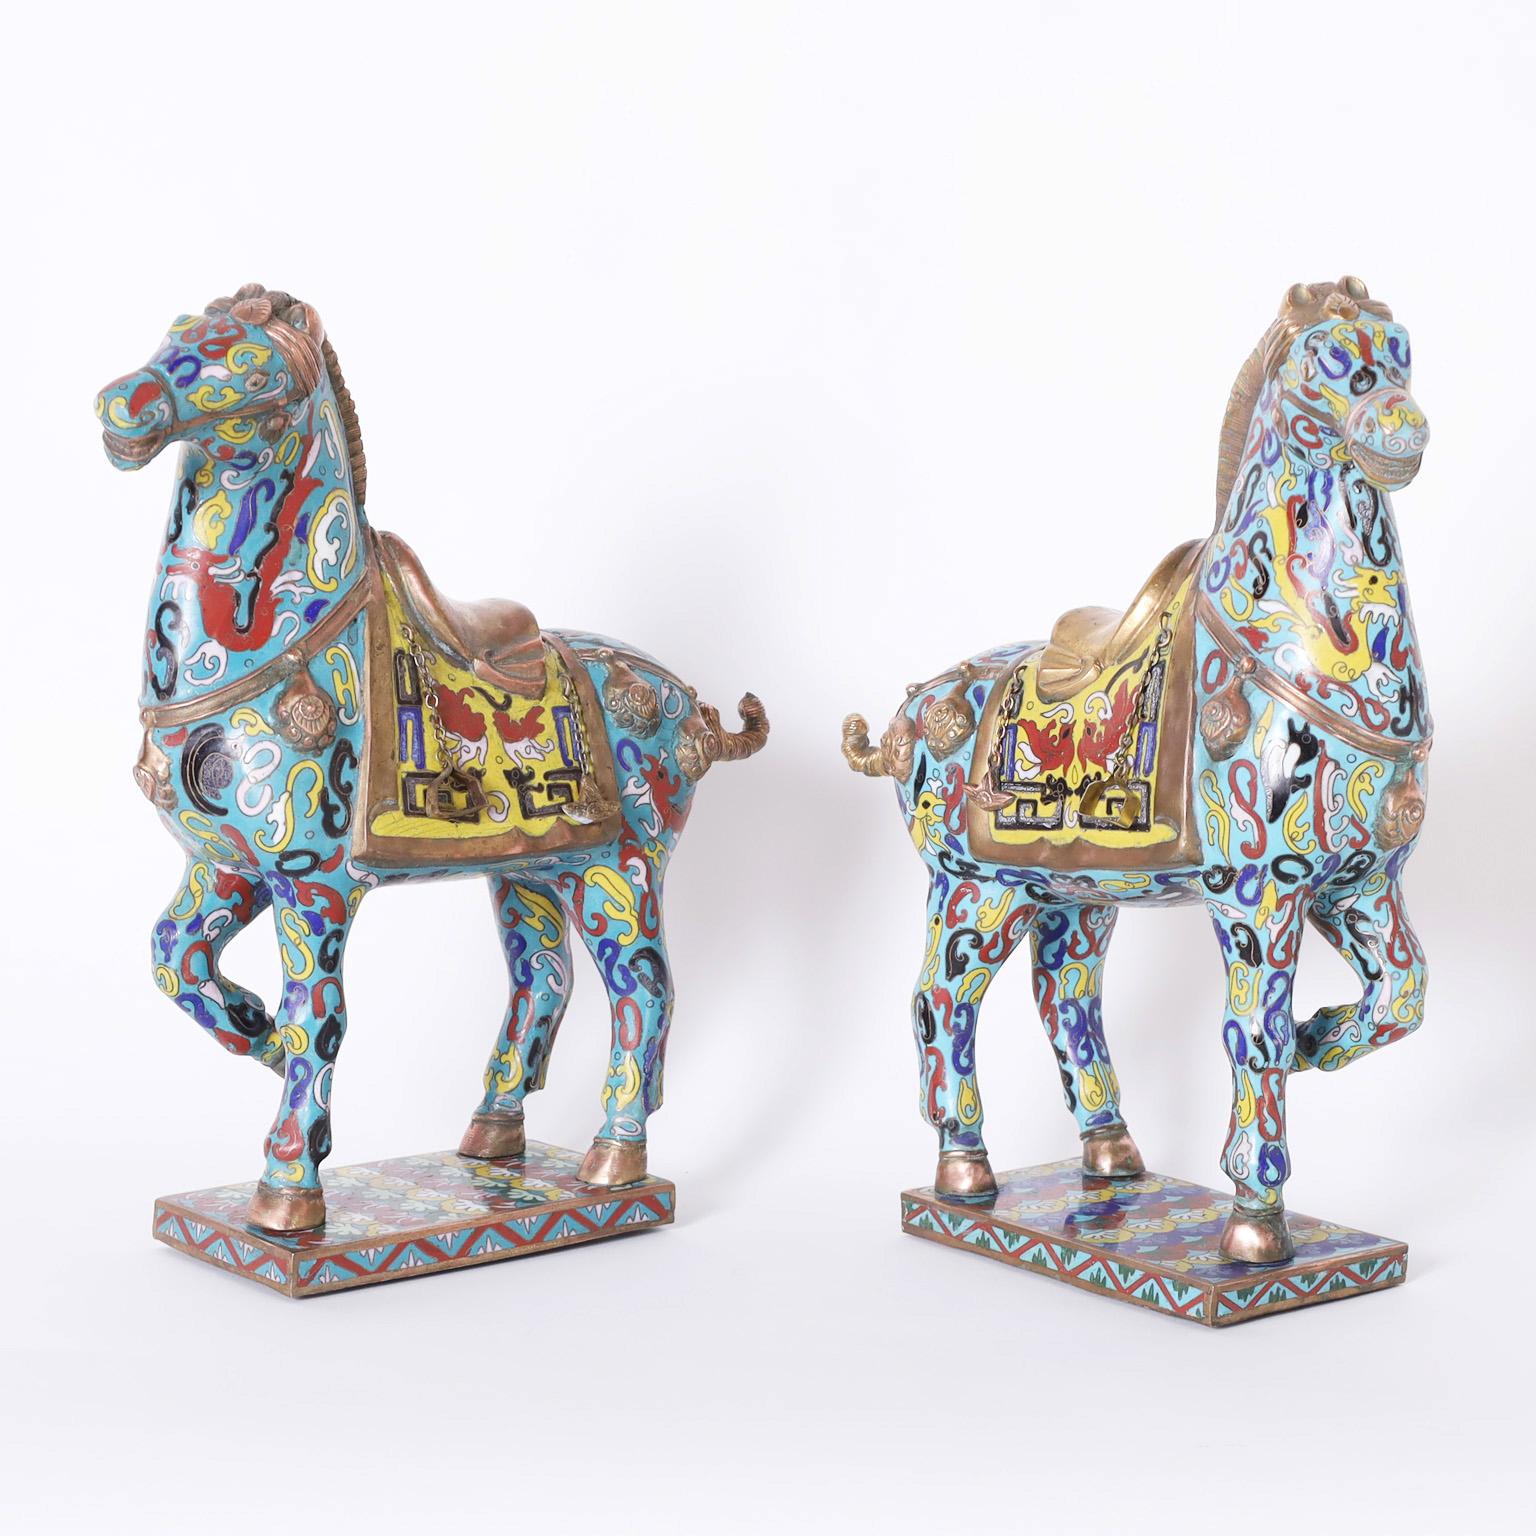 Vintage pair of Chinese cloisonné horses with a Tang dynasty form decorated with colorful symbolic references on an alluring blue background.